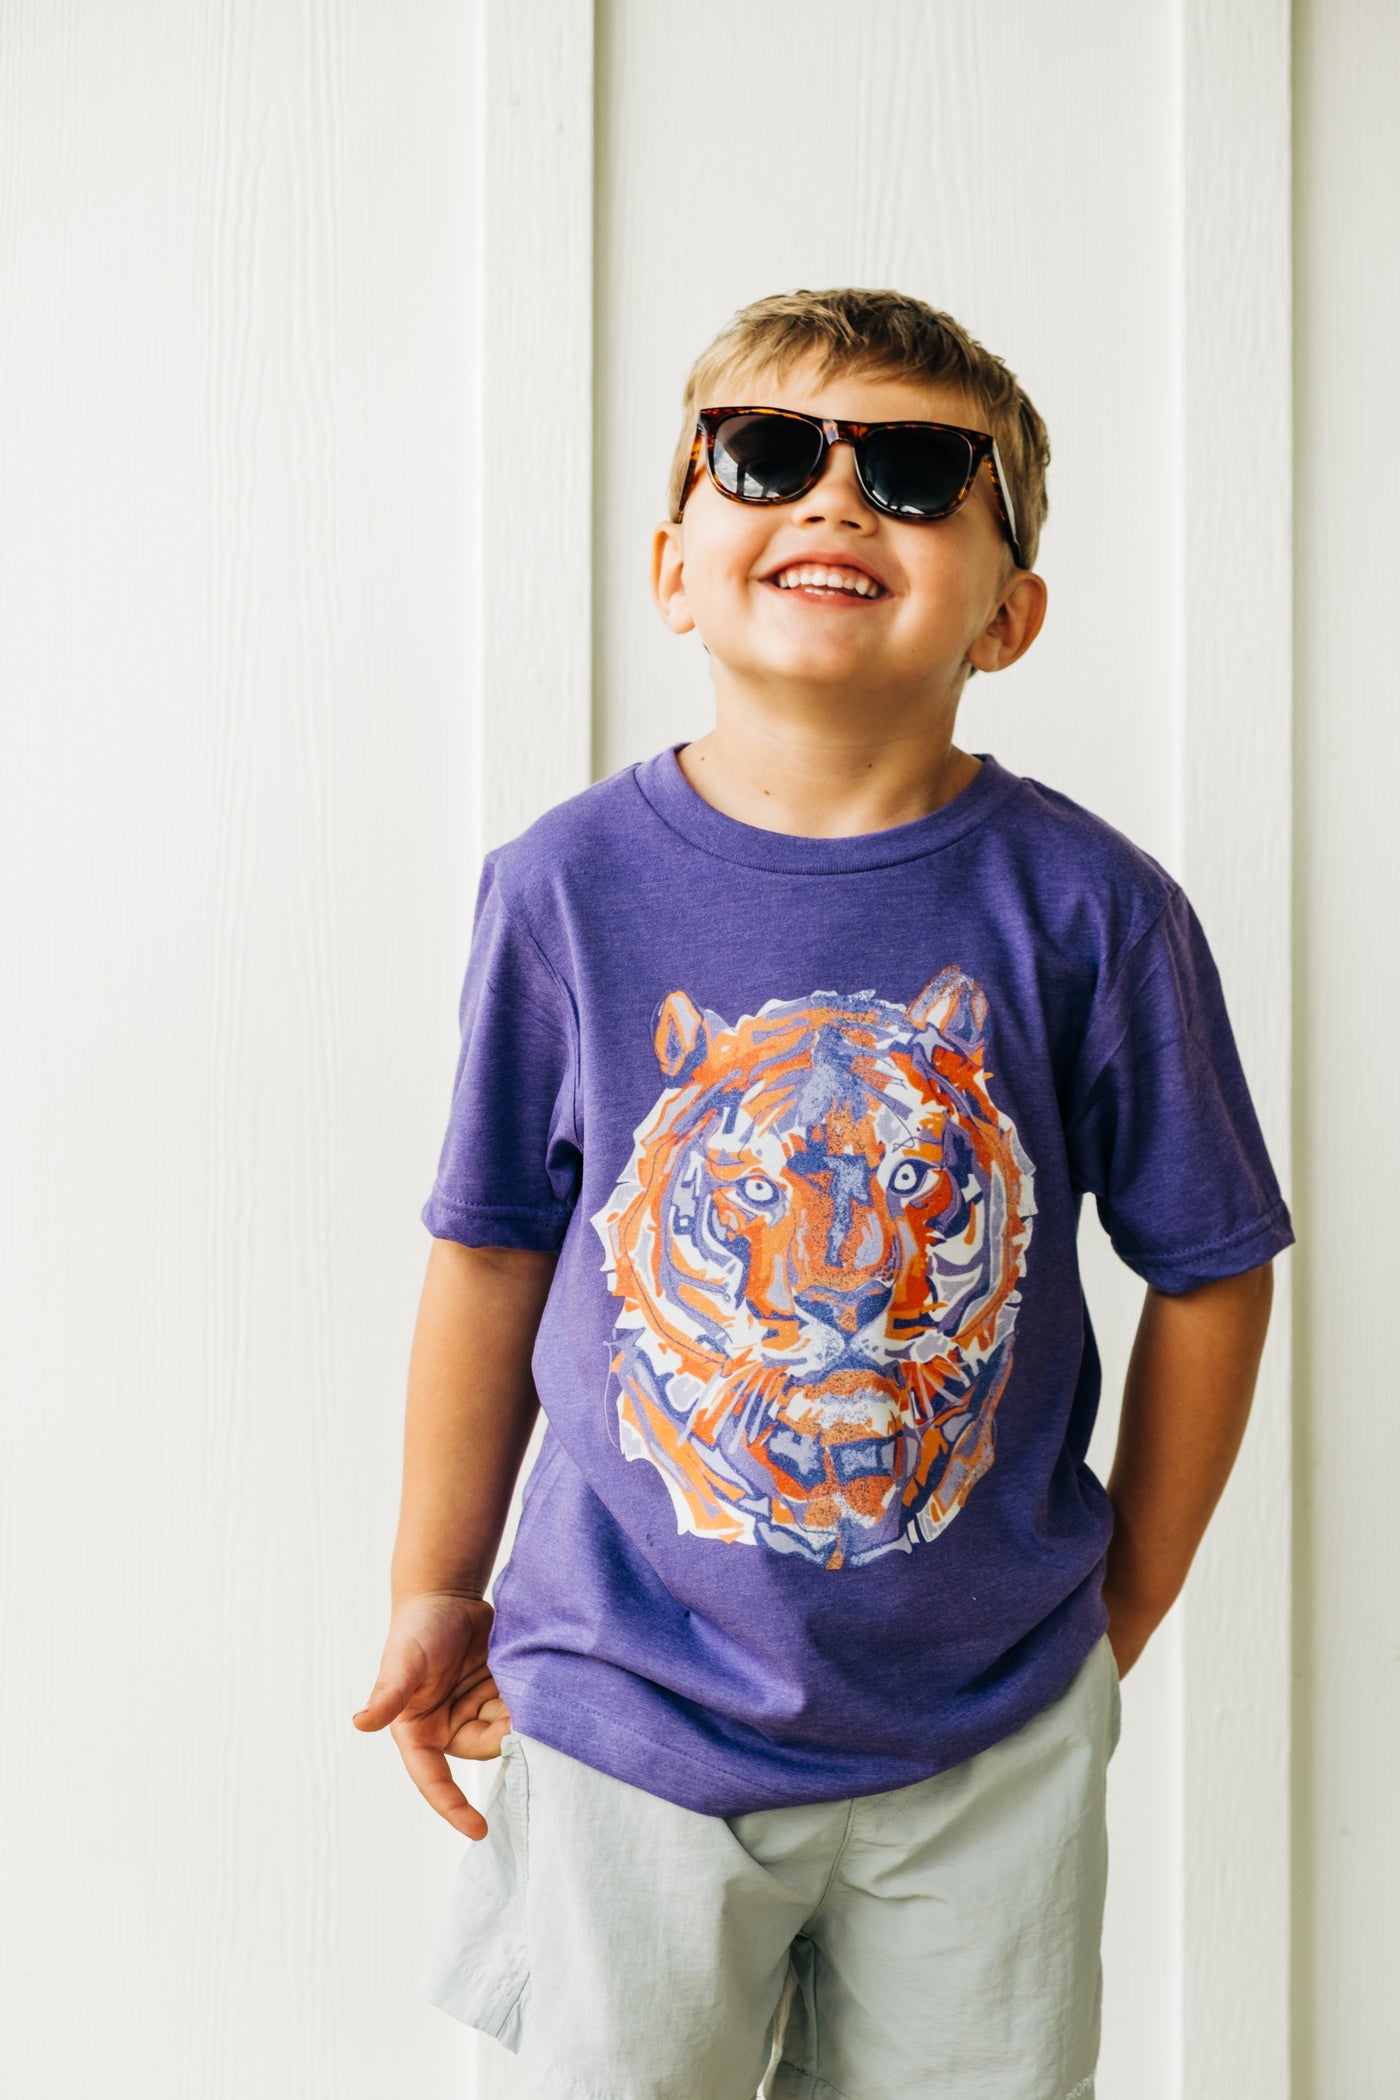 Purple tee with a white, orange and purple layered tiger graphic